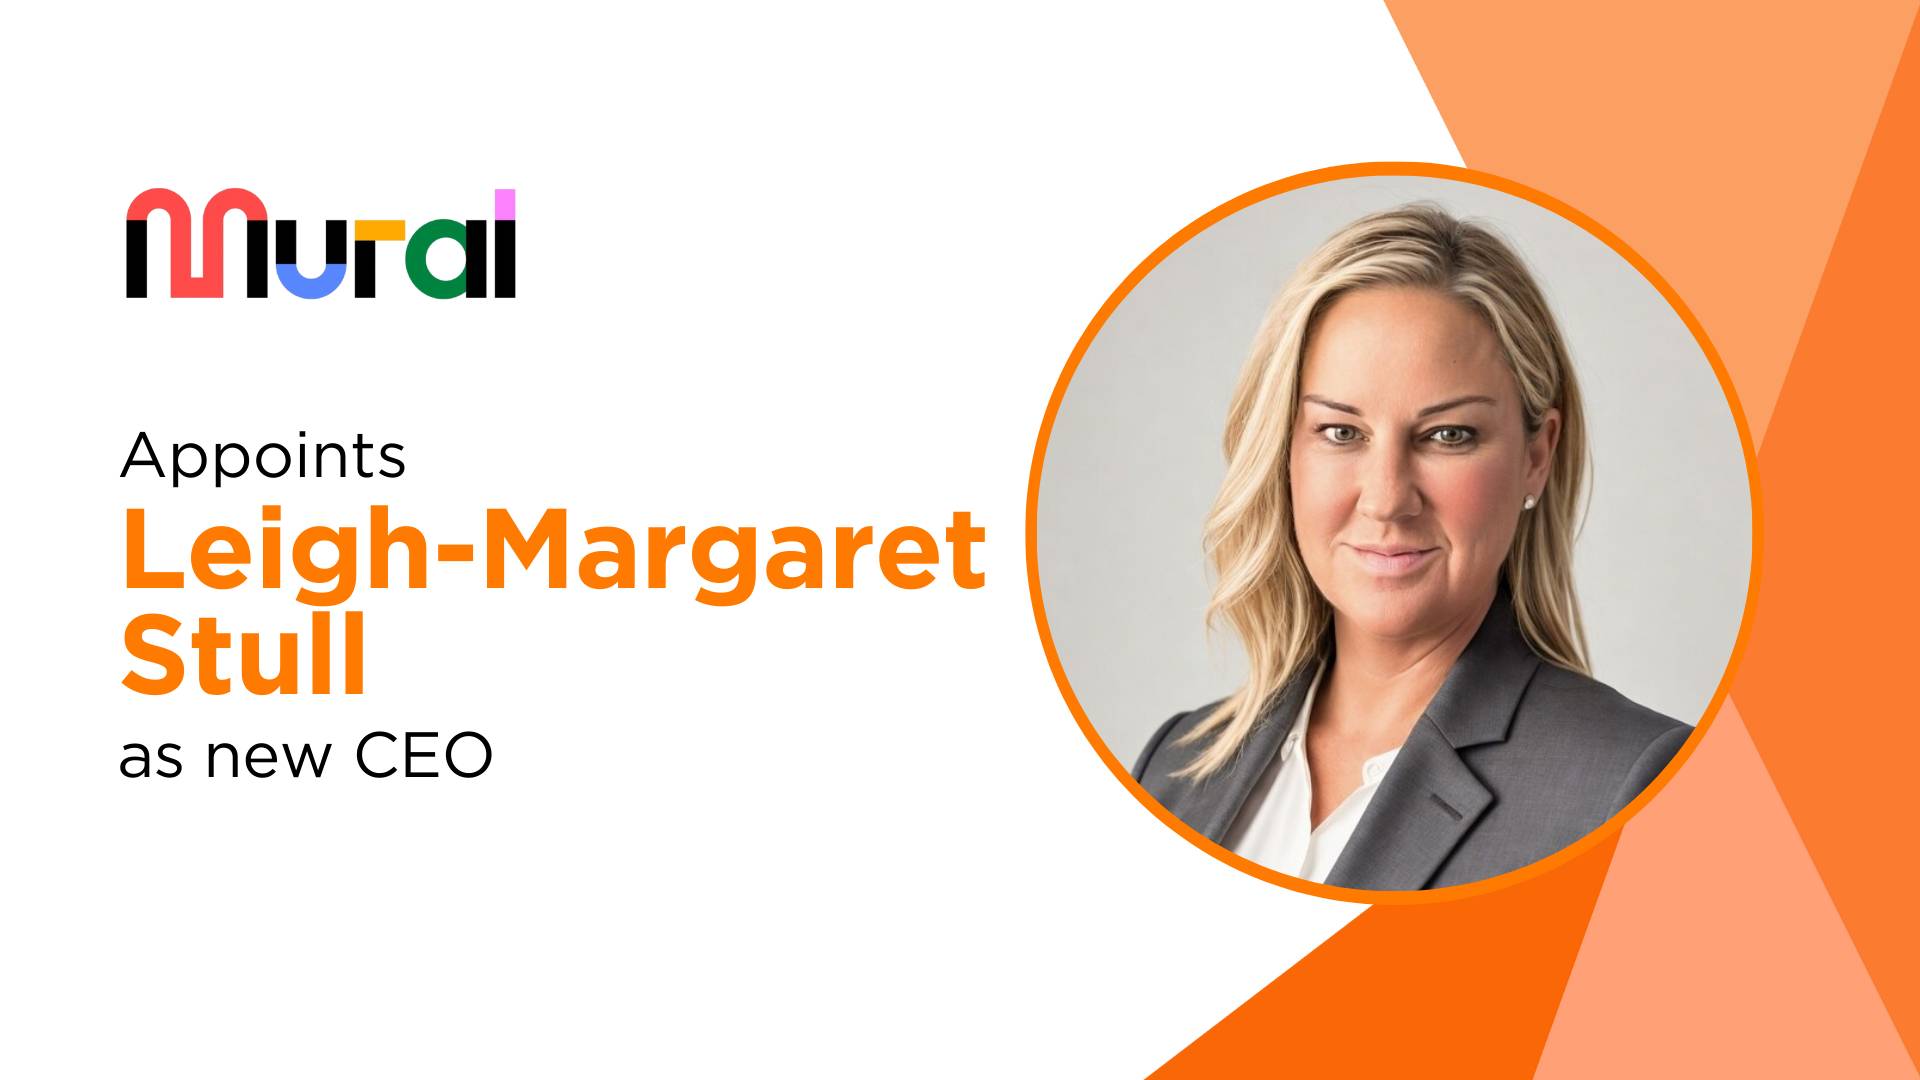 Mural Appoints Leigh-Margaret Stull as New CEO to Drive Growth and Innovation